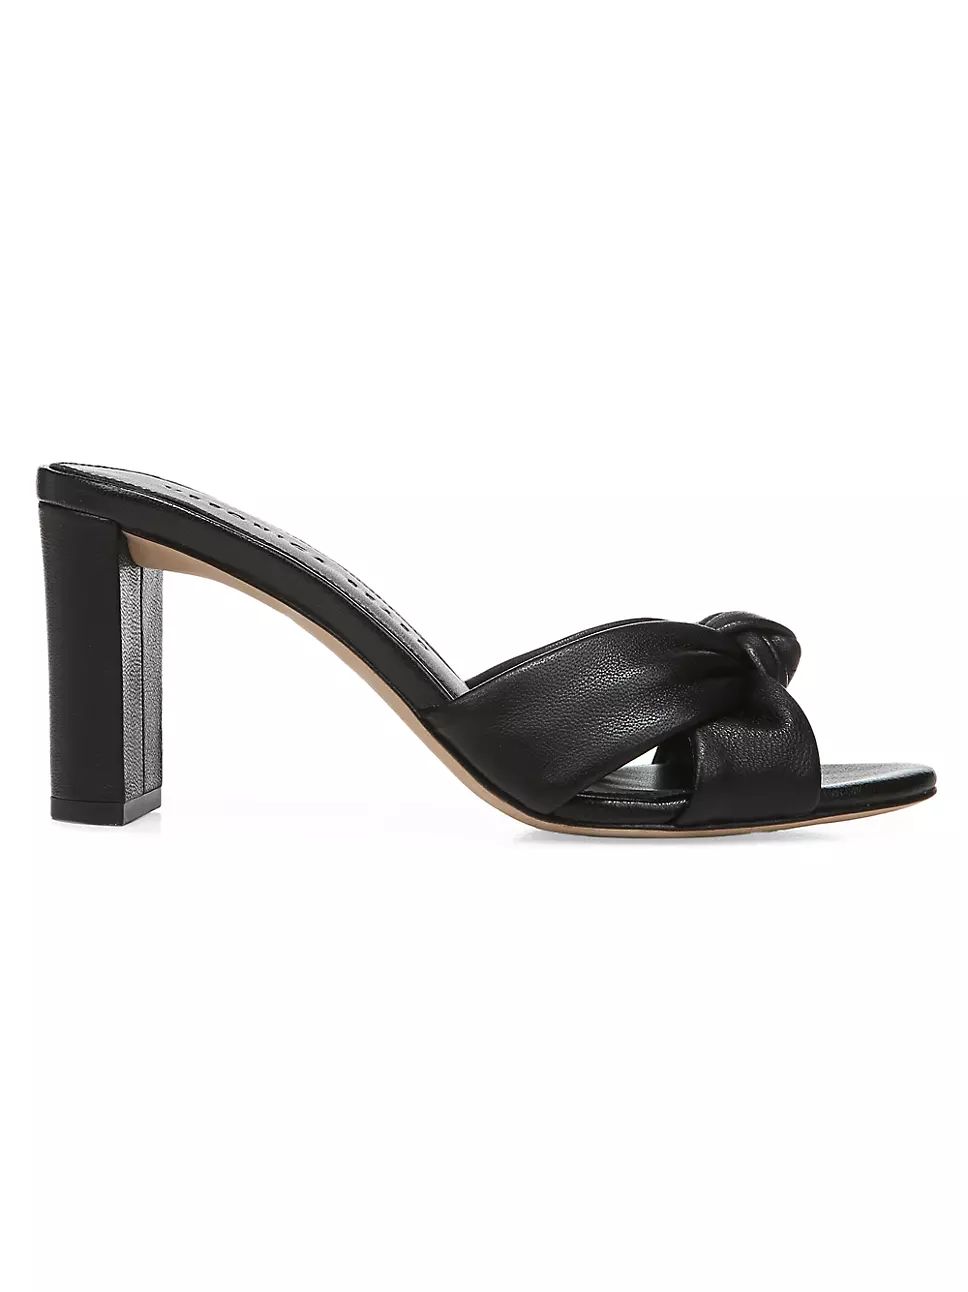 Veronica Beard Ganita 76MM Leather Knotted Sandals | Saks Fifth Avenue